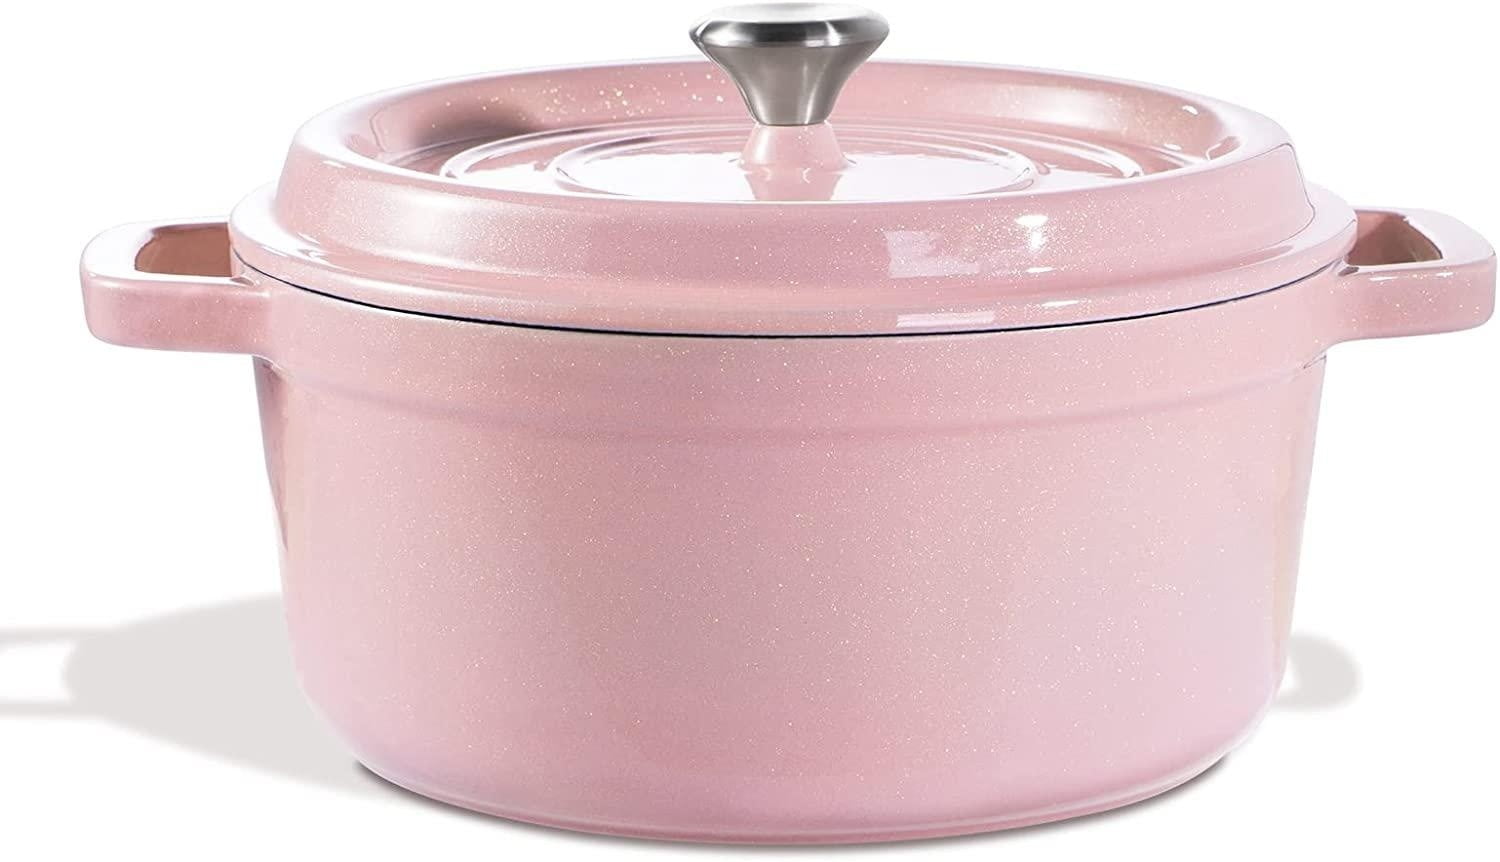 Dutch Oven Pot with Lid, Enameled Cast Iron Coated Dutch Oven 6QT Deep  Round Oven, Non-Stick Pan with Dual Handle for Braising Broiling Bread  Baking